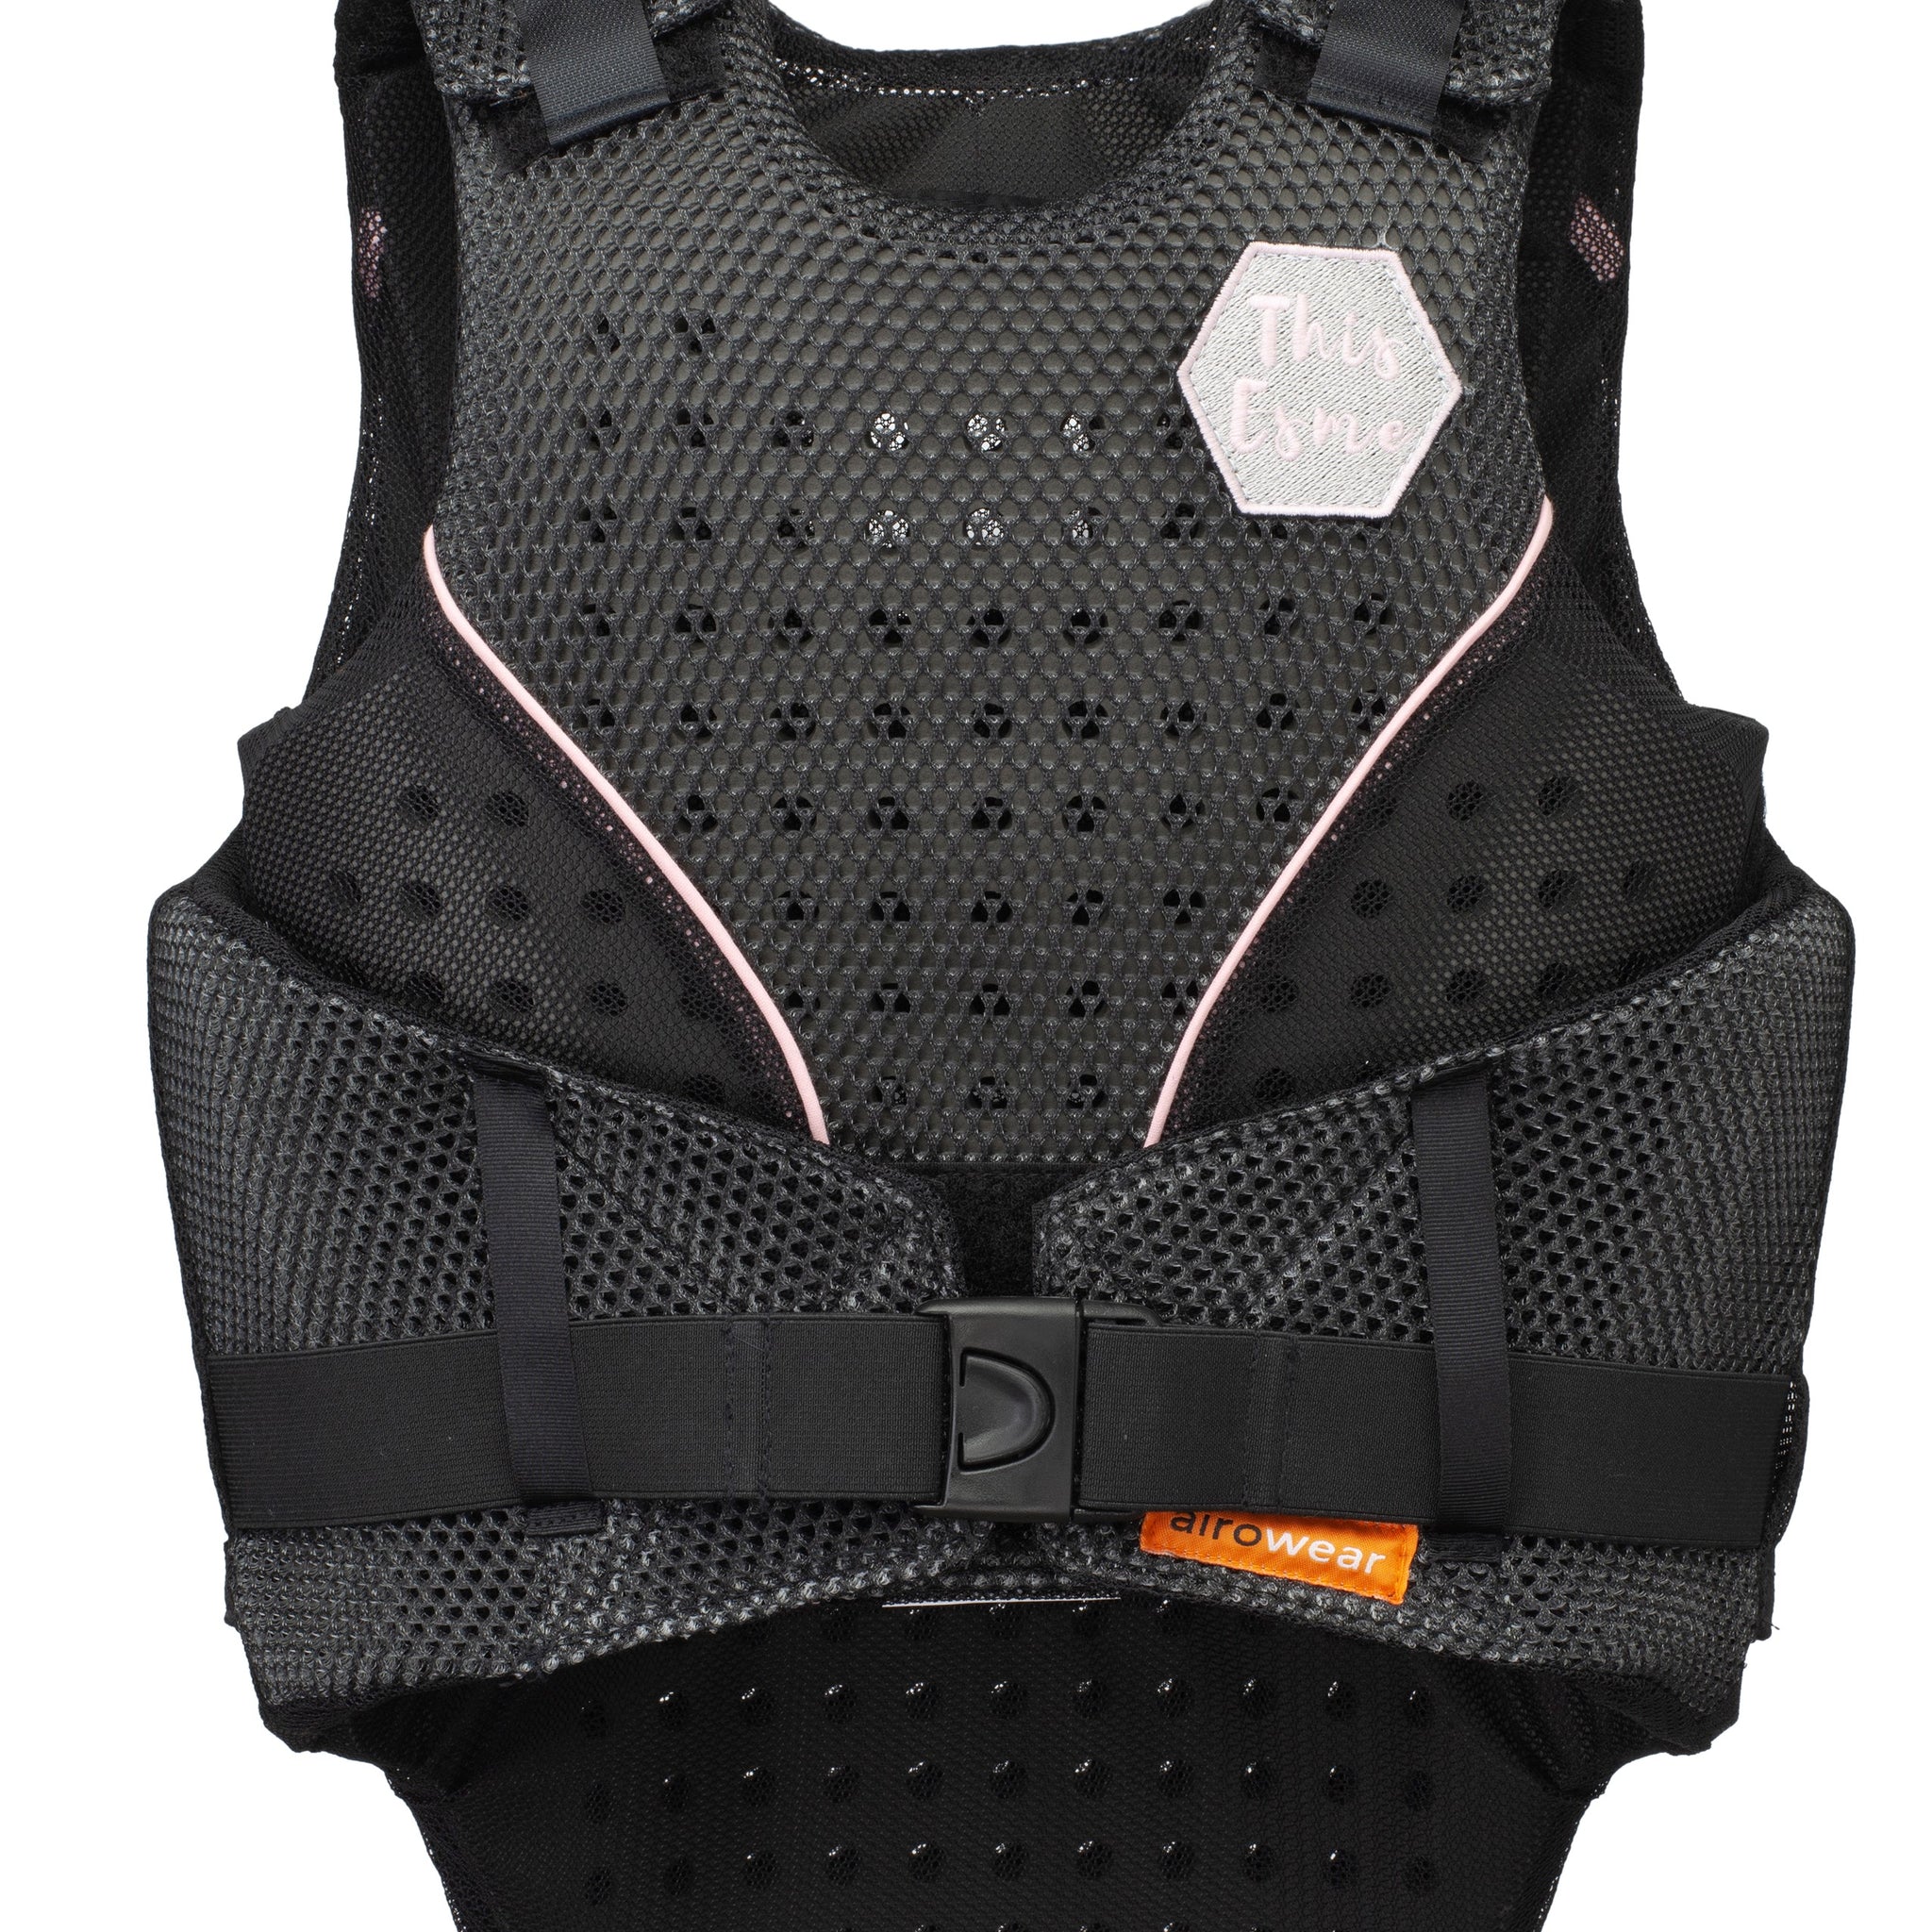 Airowear This Esme Adults Body Protector - Baby Blue